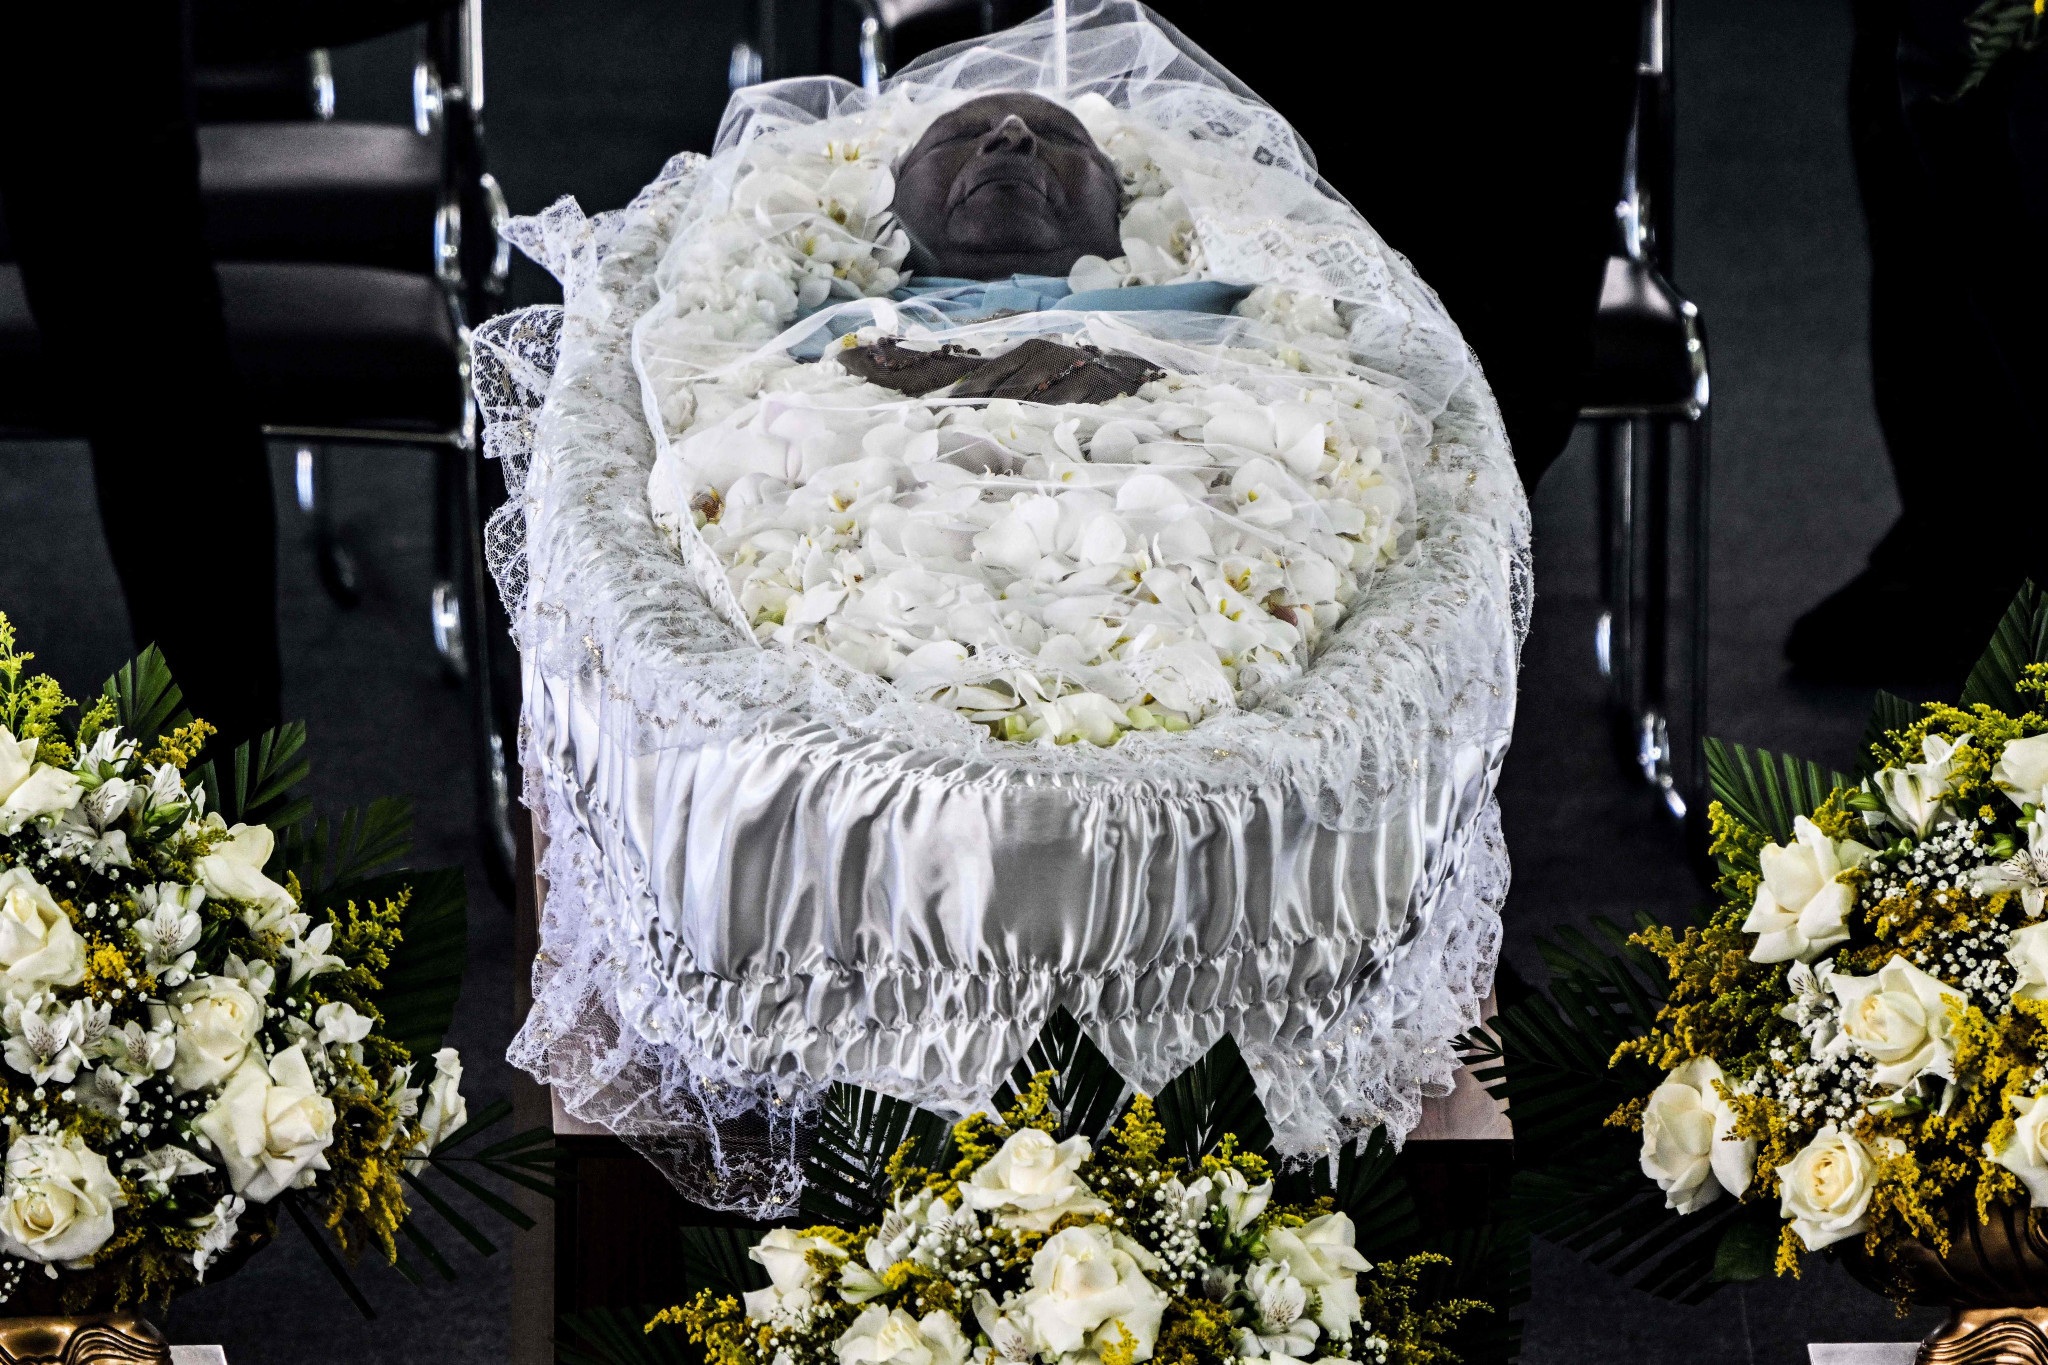 Pele's open casket at the stadium ©Getty Images